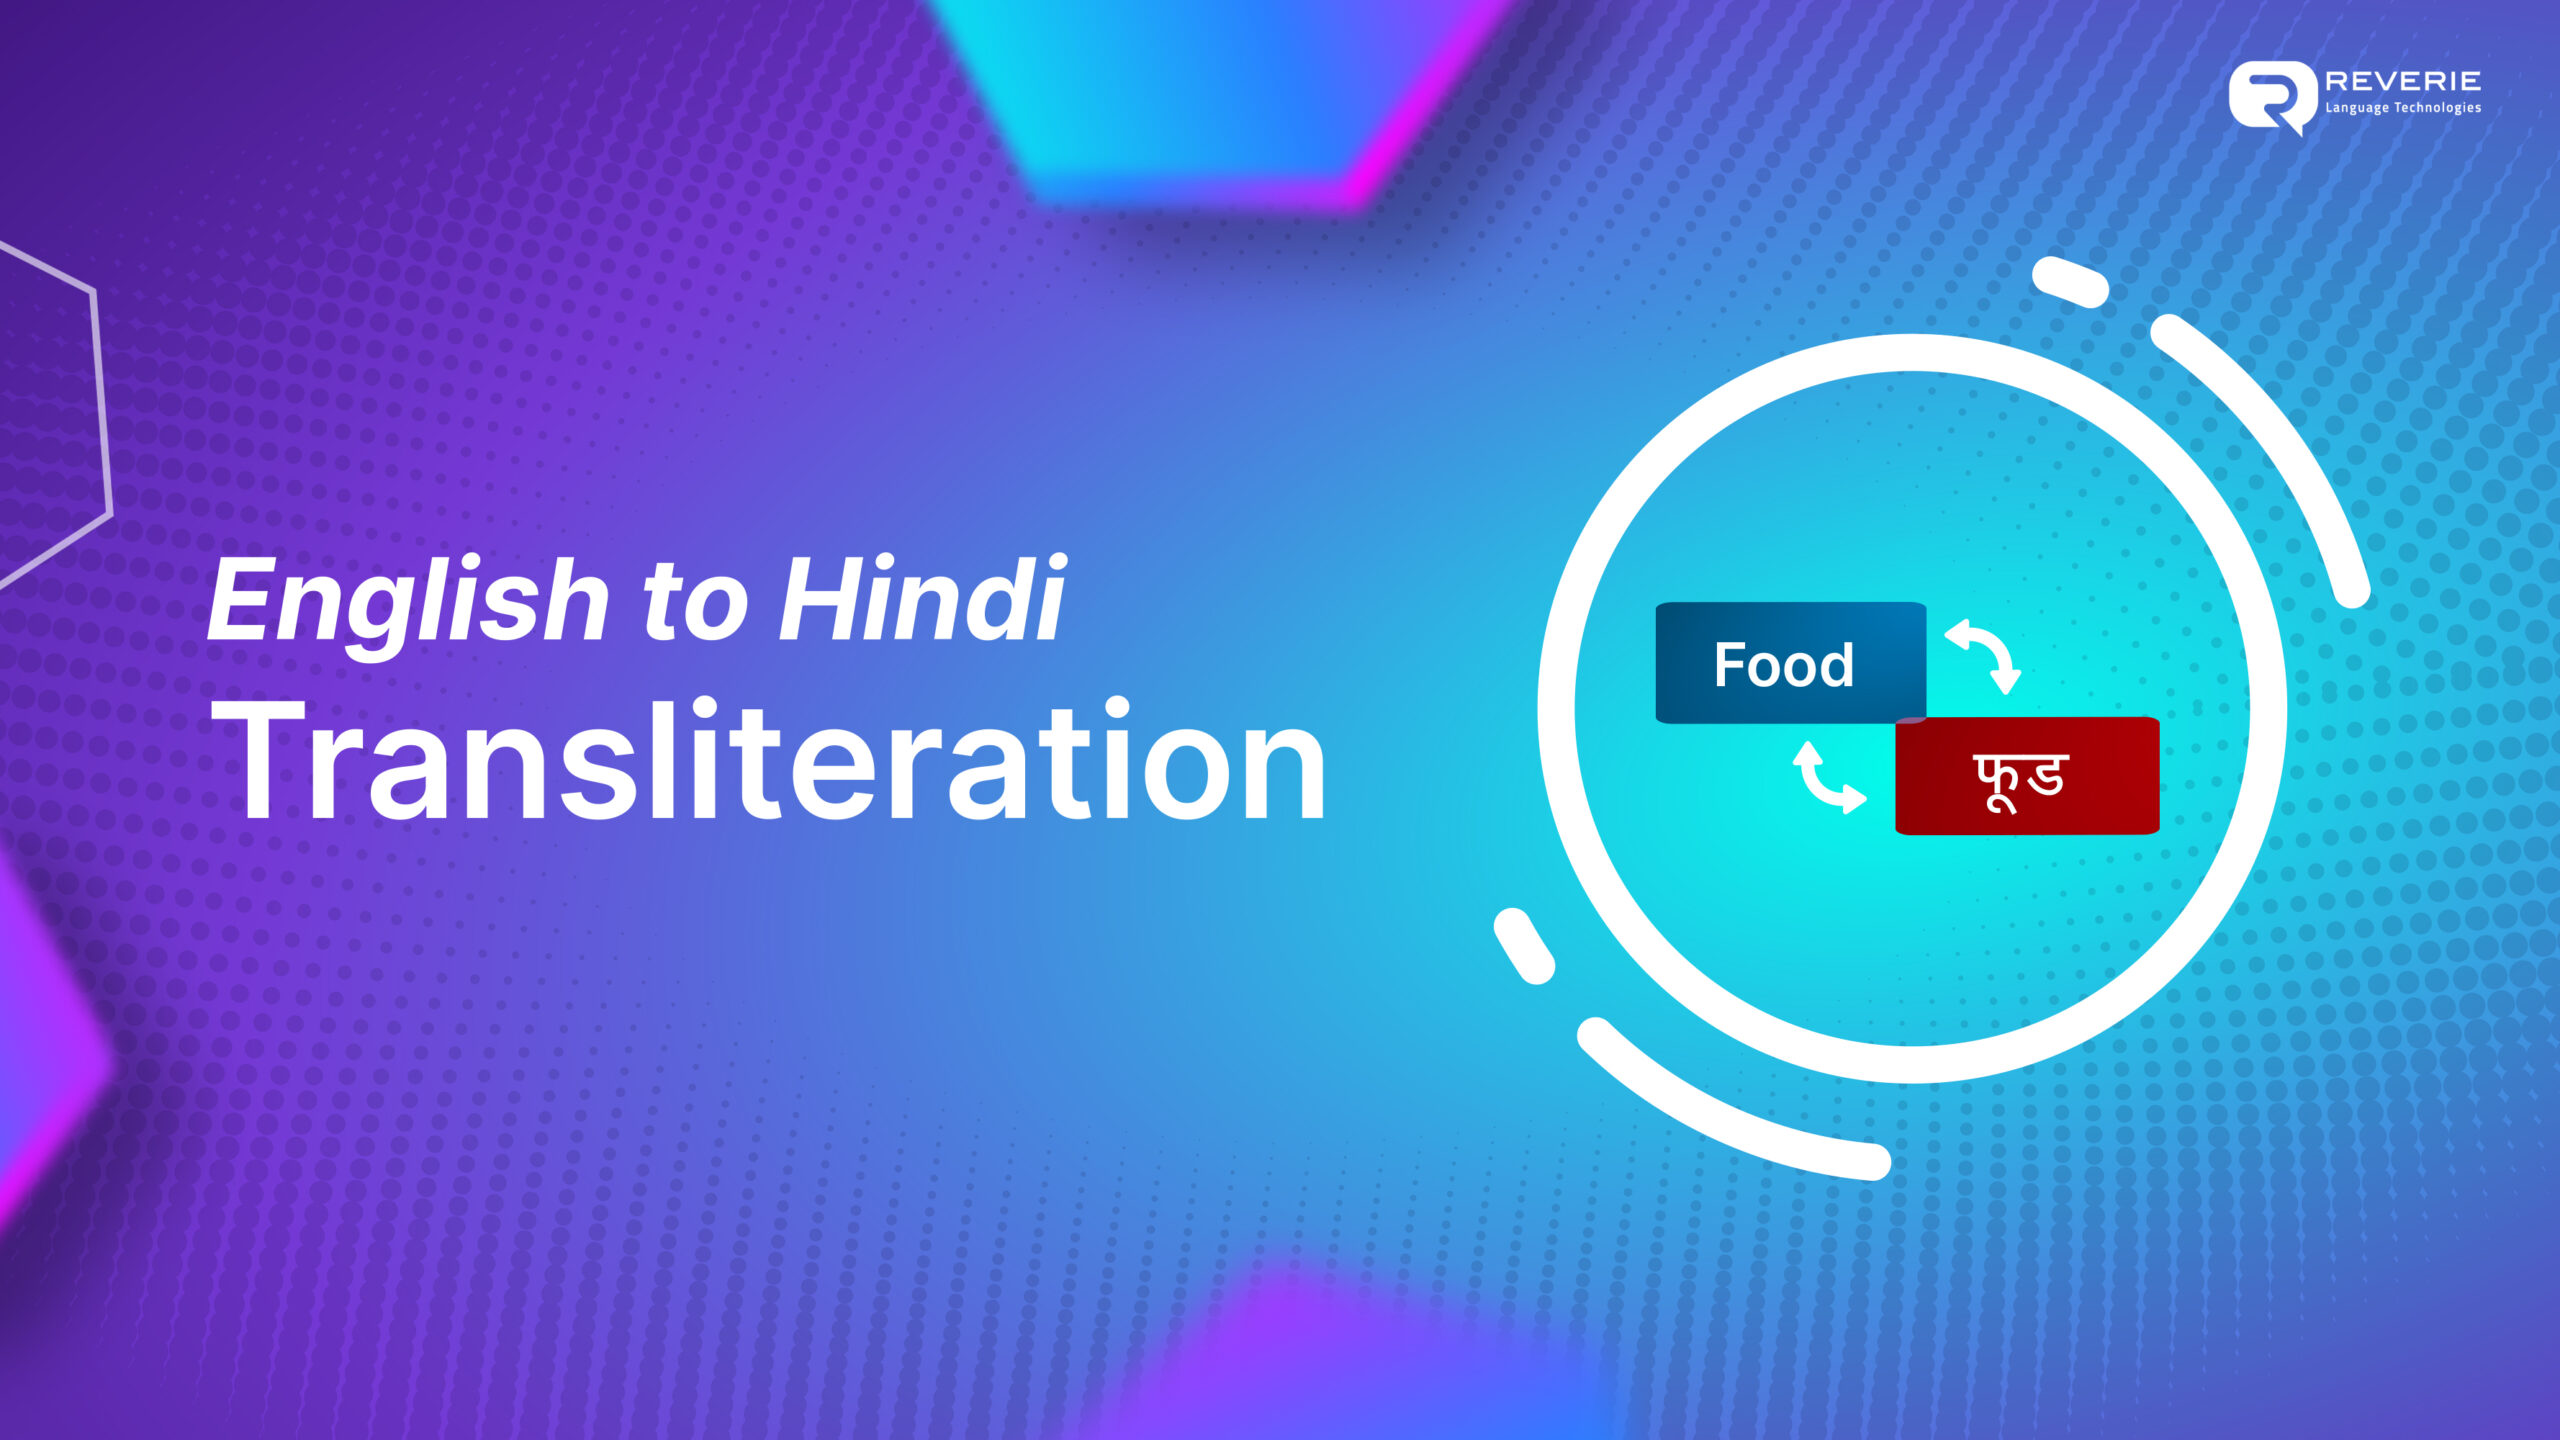 English to Hindi Transliteration: Connecting Cultures to Expand Markets